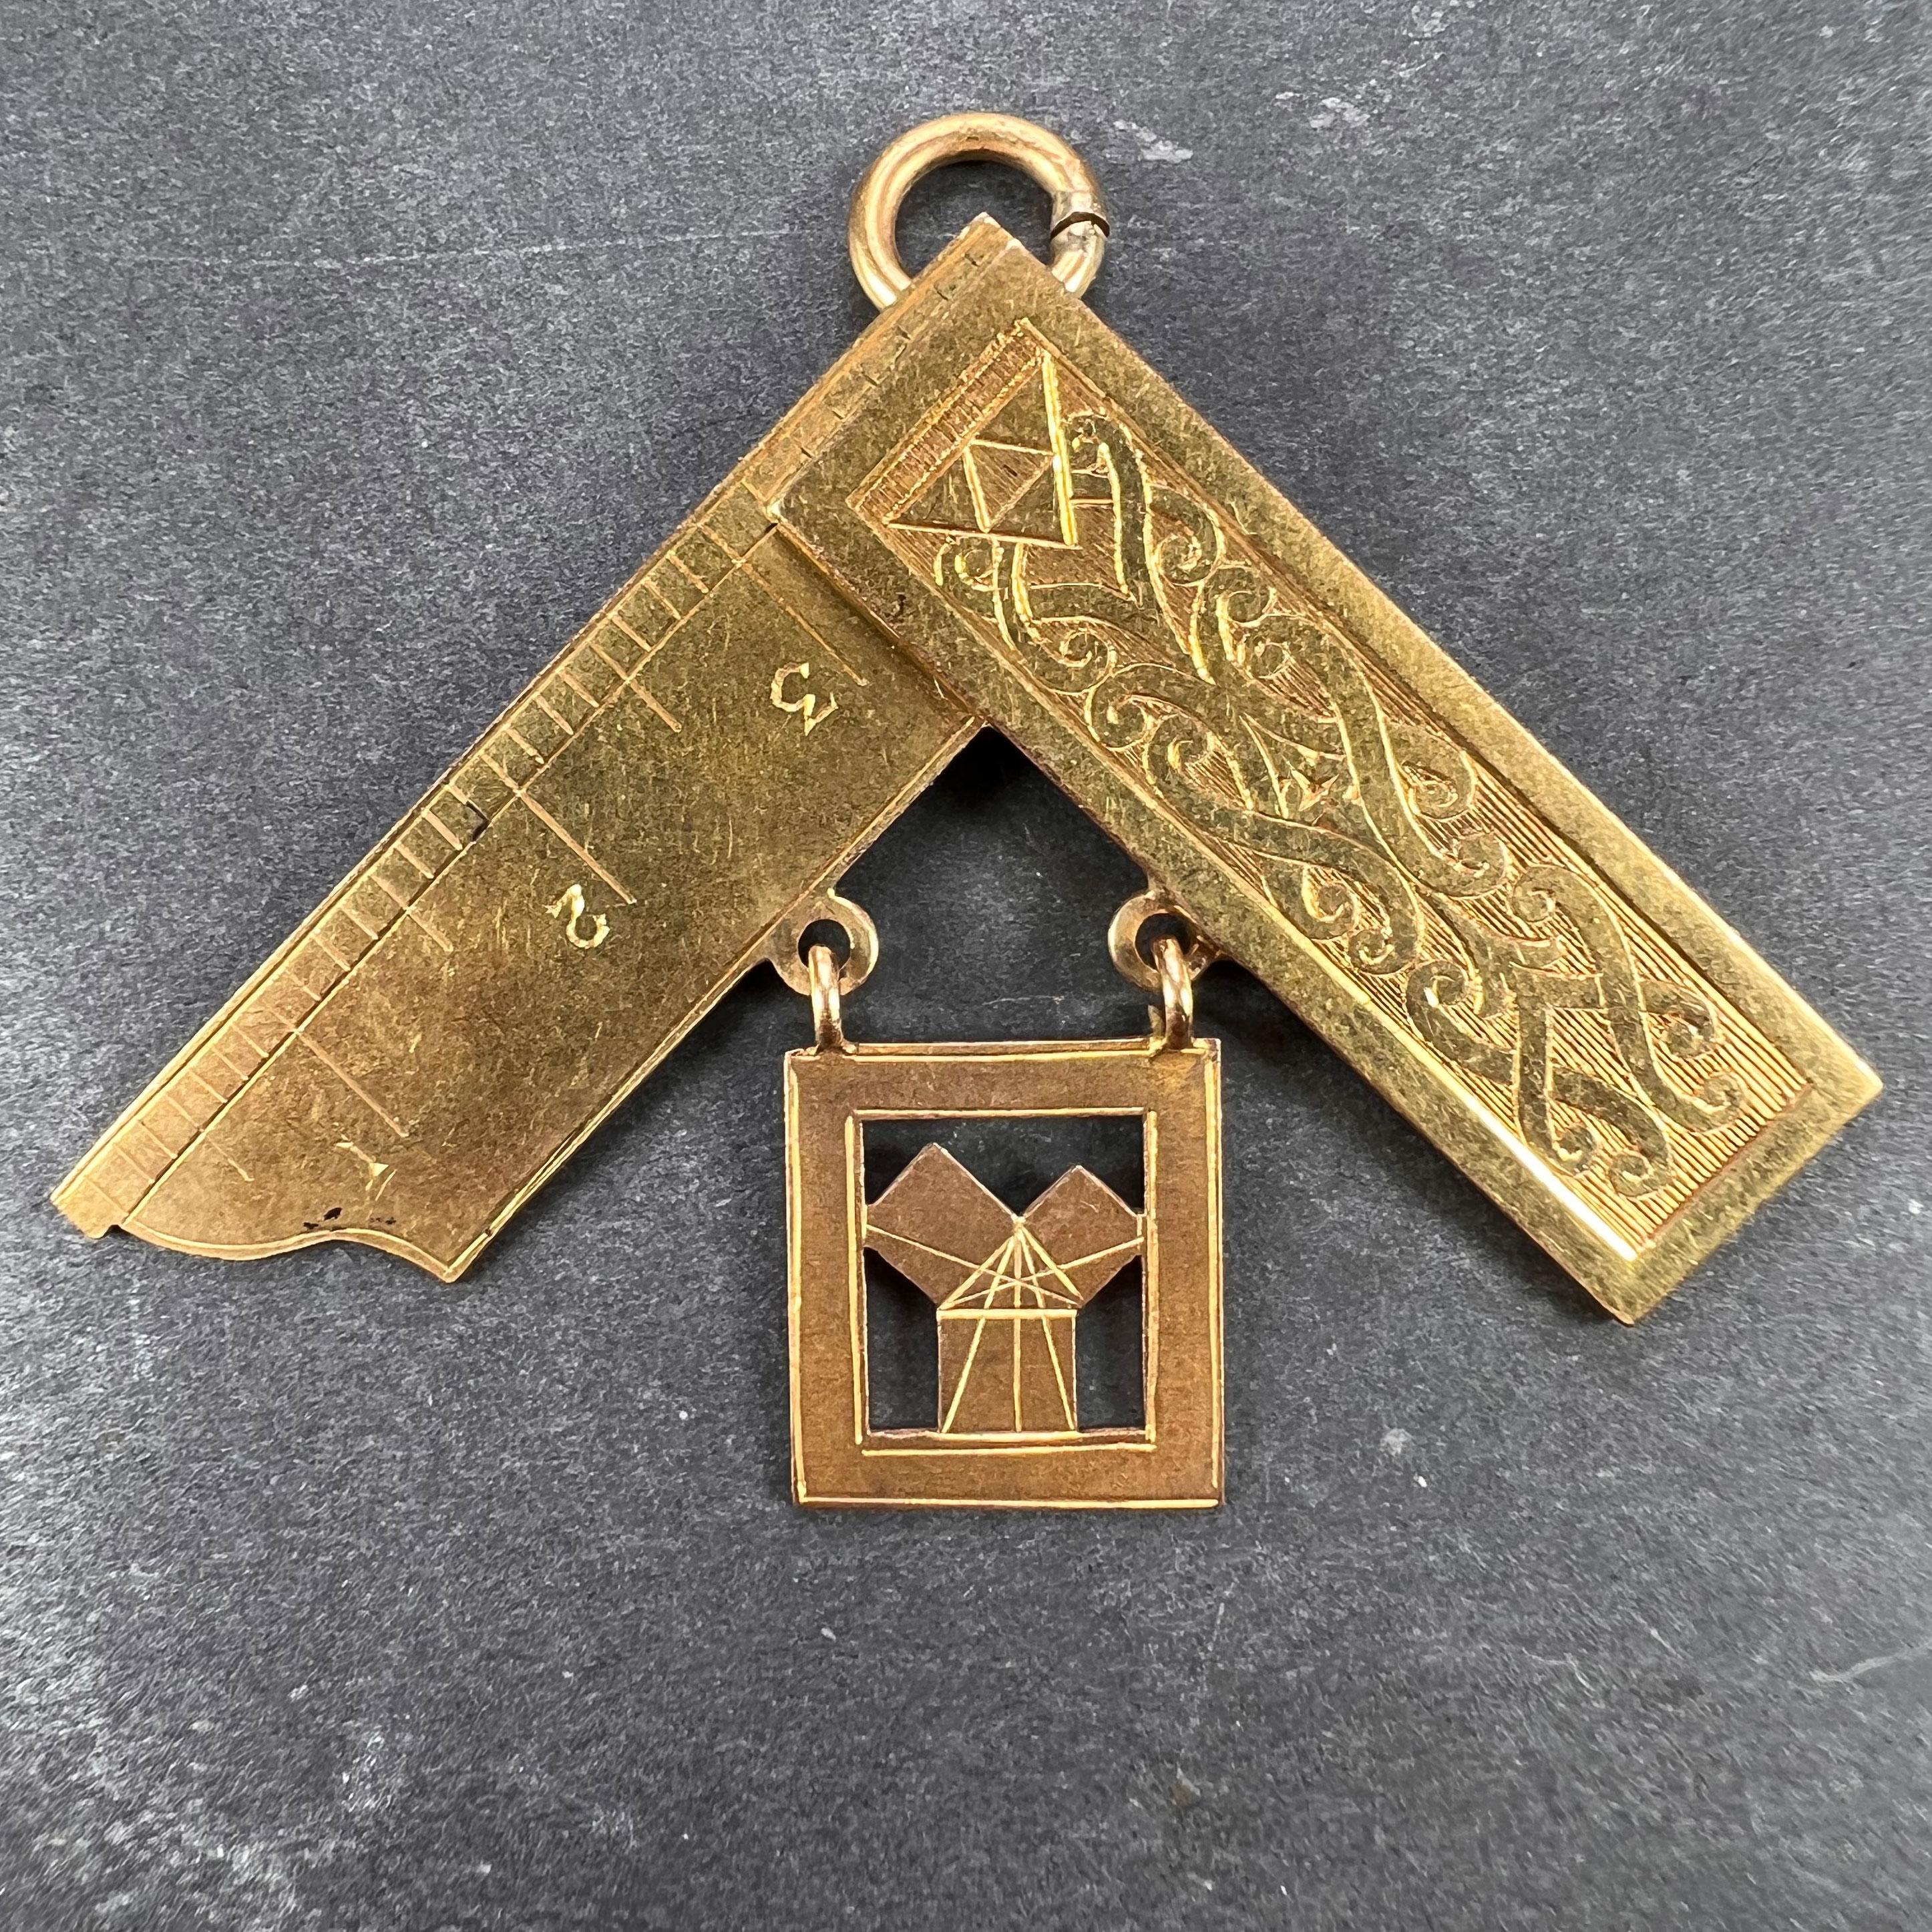 A large yellow gold charm pendant designed as a Masonic set square inscribed ‘Presented by the Officers and Brethren of the lodge to Wor. Bro. Ernest Sykes as a mark of their esteem and appreciation on the termination of his year as W.M. Dec 6th